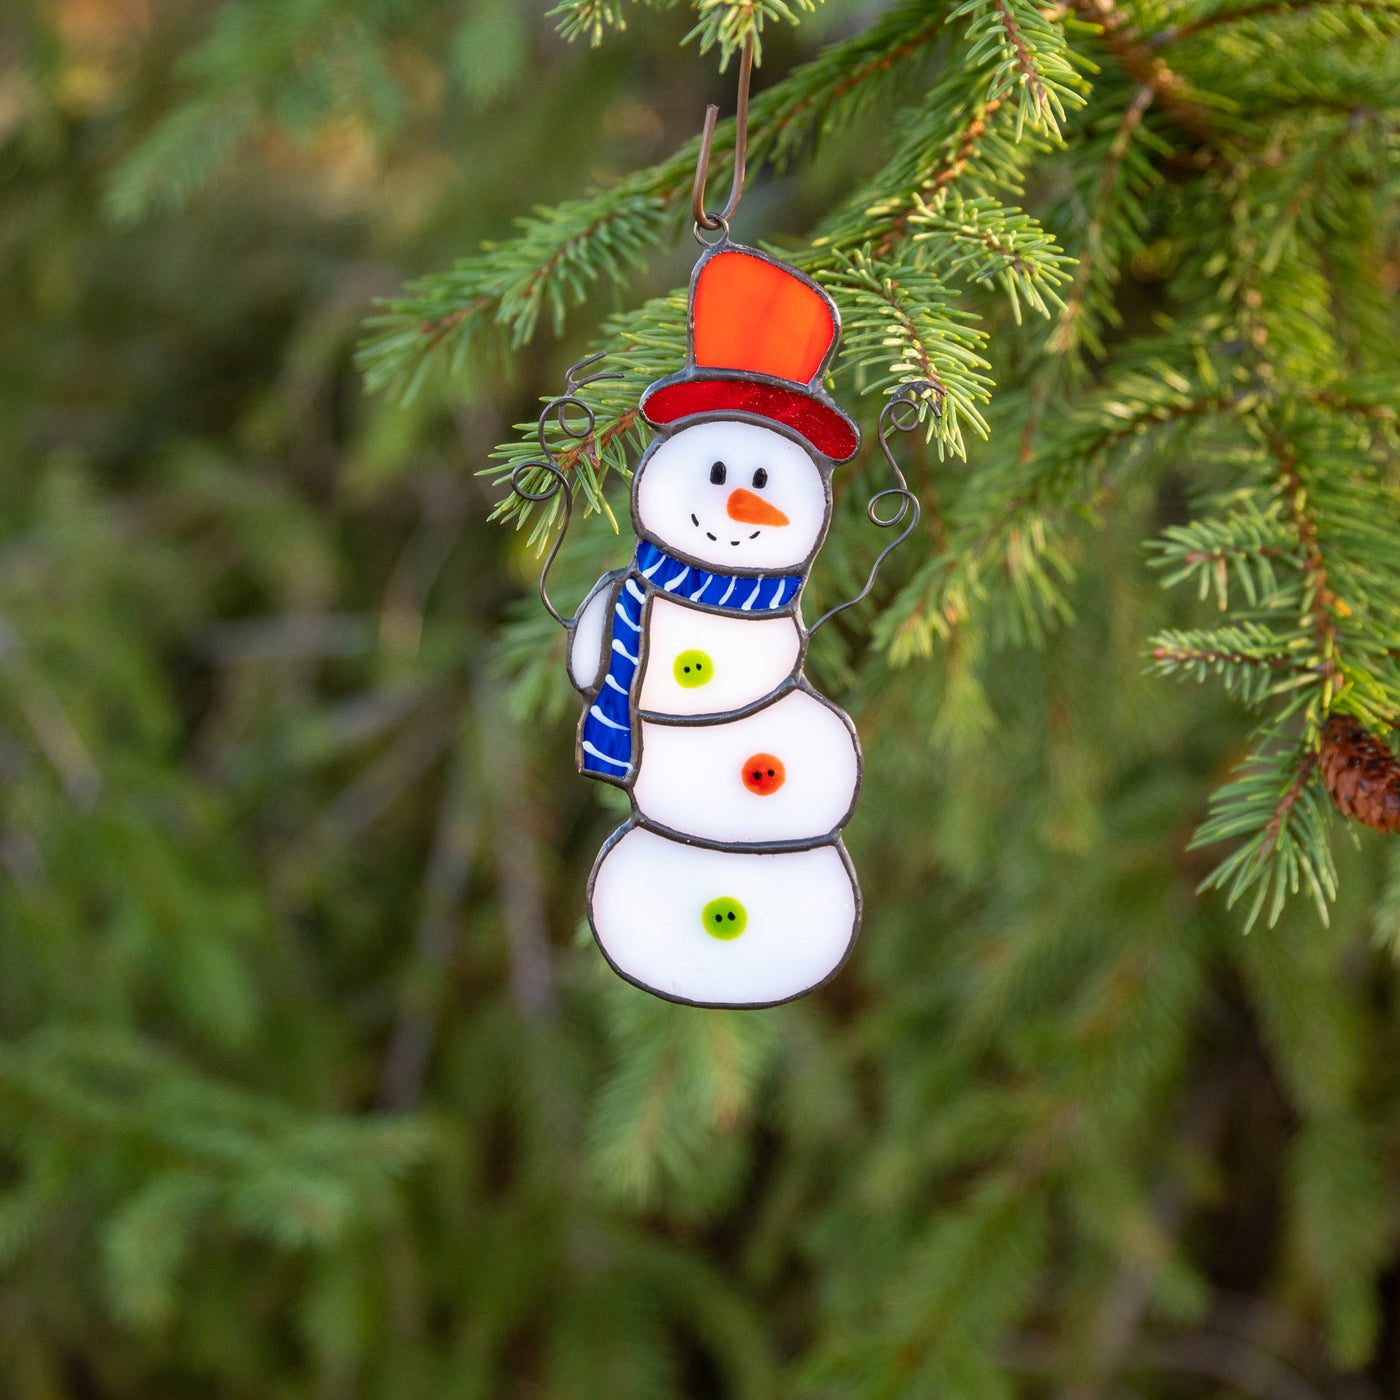 Stained glass snowman suncatcher as a New Year Tree decoration